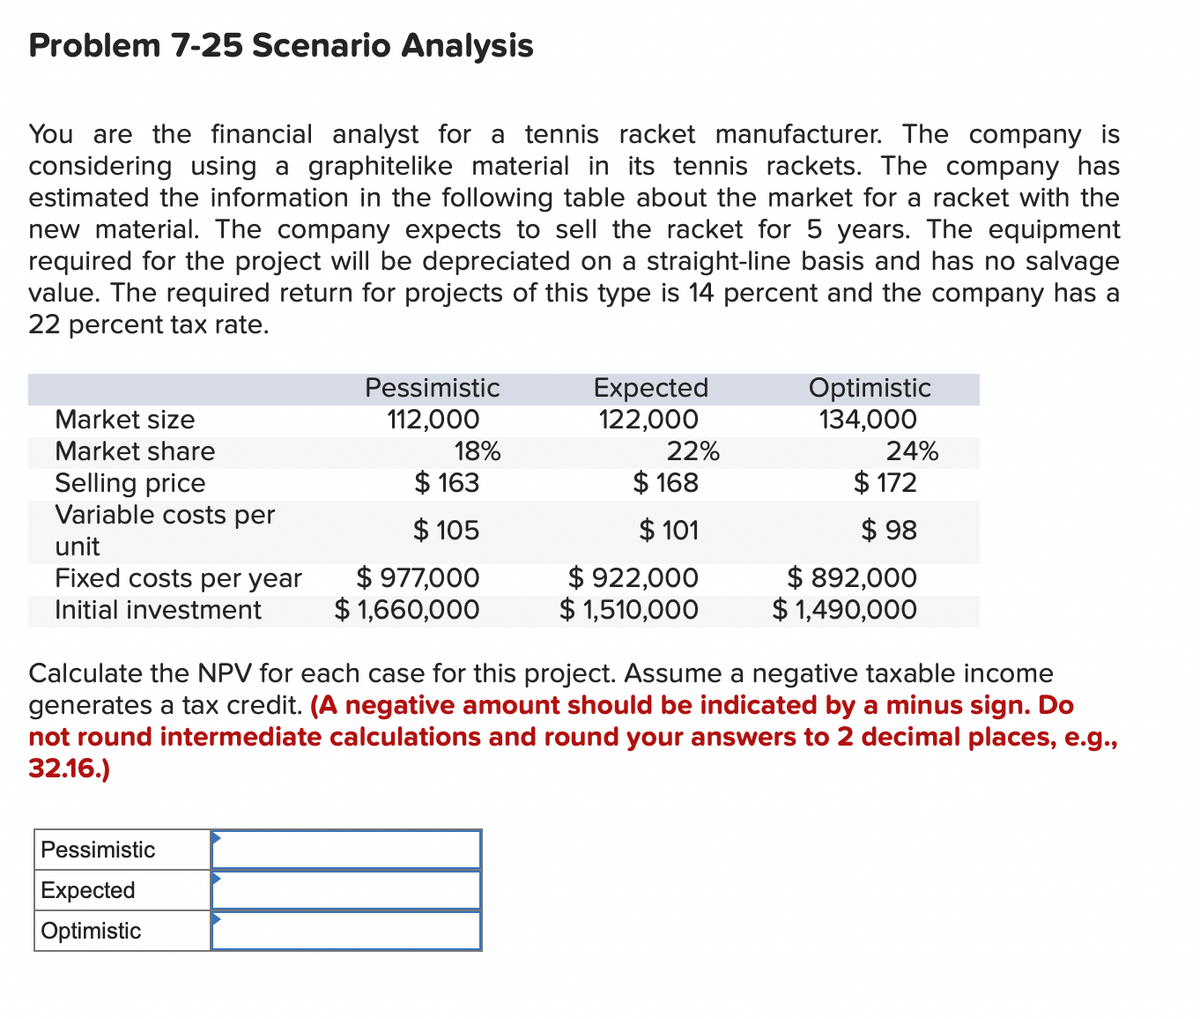 Problem 7-25 Scenario Analysis
You are the financial analyst for a tennis racket manufacturer. The company is
considering using a graphitelike material in its tennis rackets. The company has
estimated the information in the following table about the market for a racket with the
new material. The company expects to sell the racket for 5 years. The equipment
required for the project will be depreciated on a straight-line basis and has no salvage
value. The required return for projects of this type is 14 percent and the company has a
22 percent tax rate.
Market size
Pessimistic
112,000
Expected
Optimistic
122,000
134,000
Market share
18%
22%
24%
Selling price
$163
$168
$172
Variable costs per
$105
$ 101
$ 98
unit
Fixed costs per year
$ 977,000
$922,000
Initial investment
$ 1,660,000
$ 1,510,000
$ 892,000
$1,490,000
Calculate the NPV for each case for this project. Assume a negative taxable income
generates a tax credit. (A negative amount should be indicated by a minus sign. Do
not round intermediate calculations and round your answers to 2 decimal places, e.g.,
32.16.)
Pessimistic
Expected
Optimistic